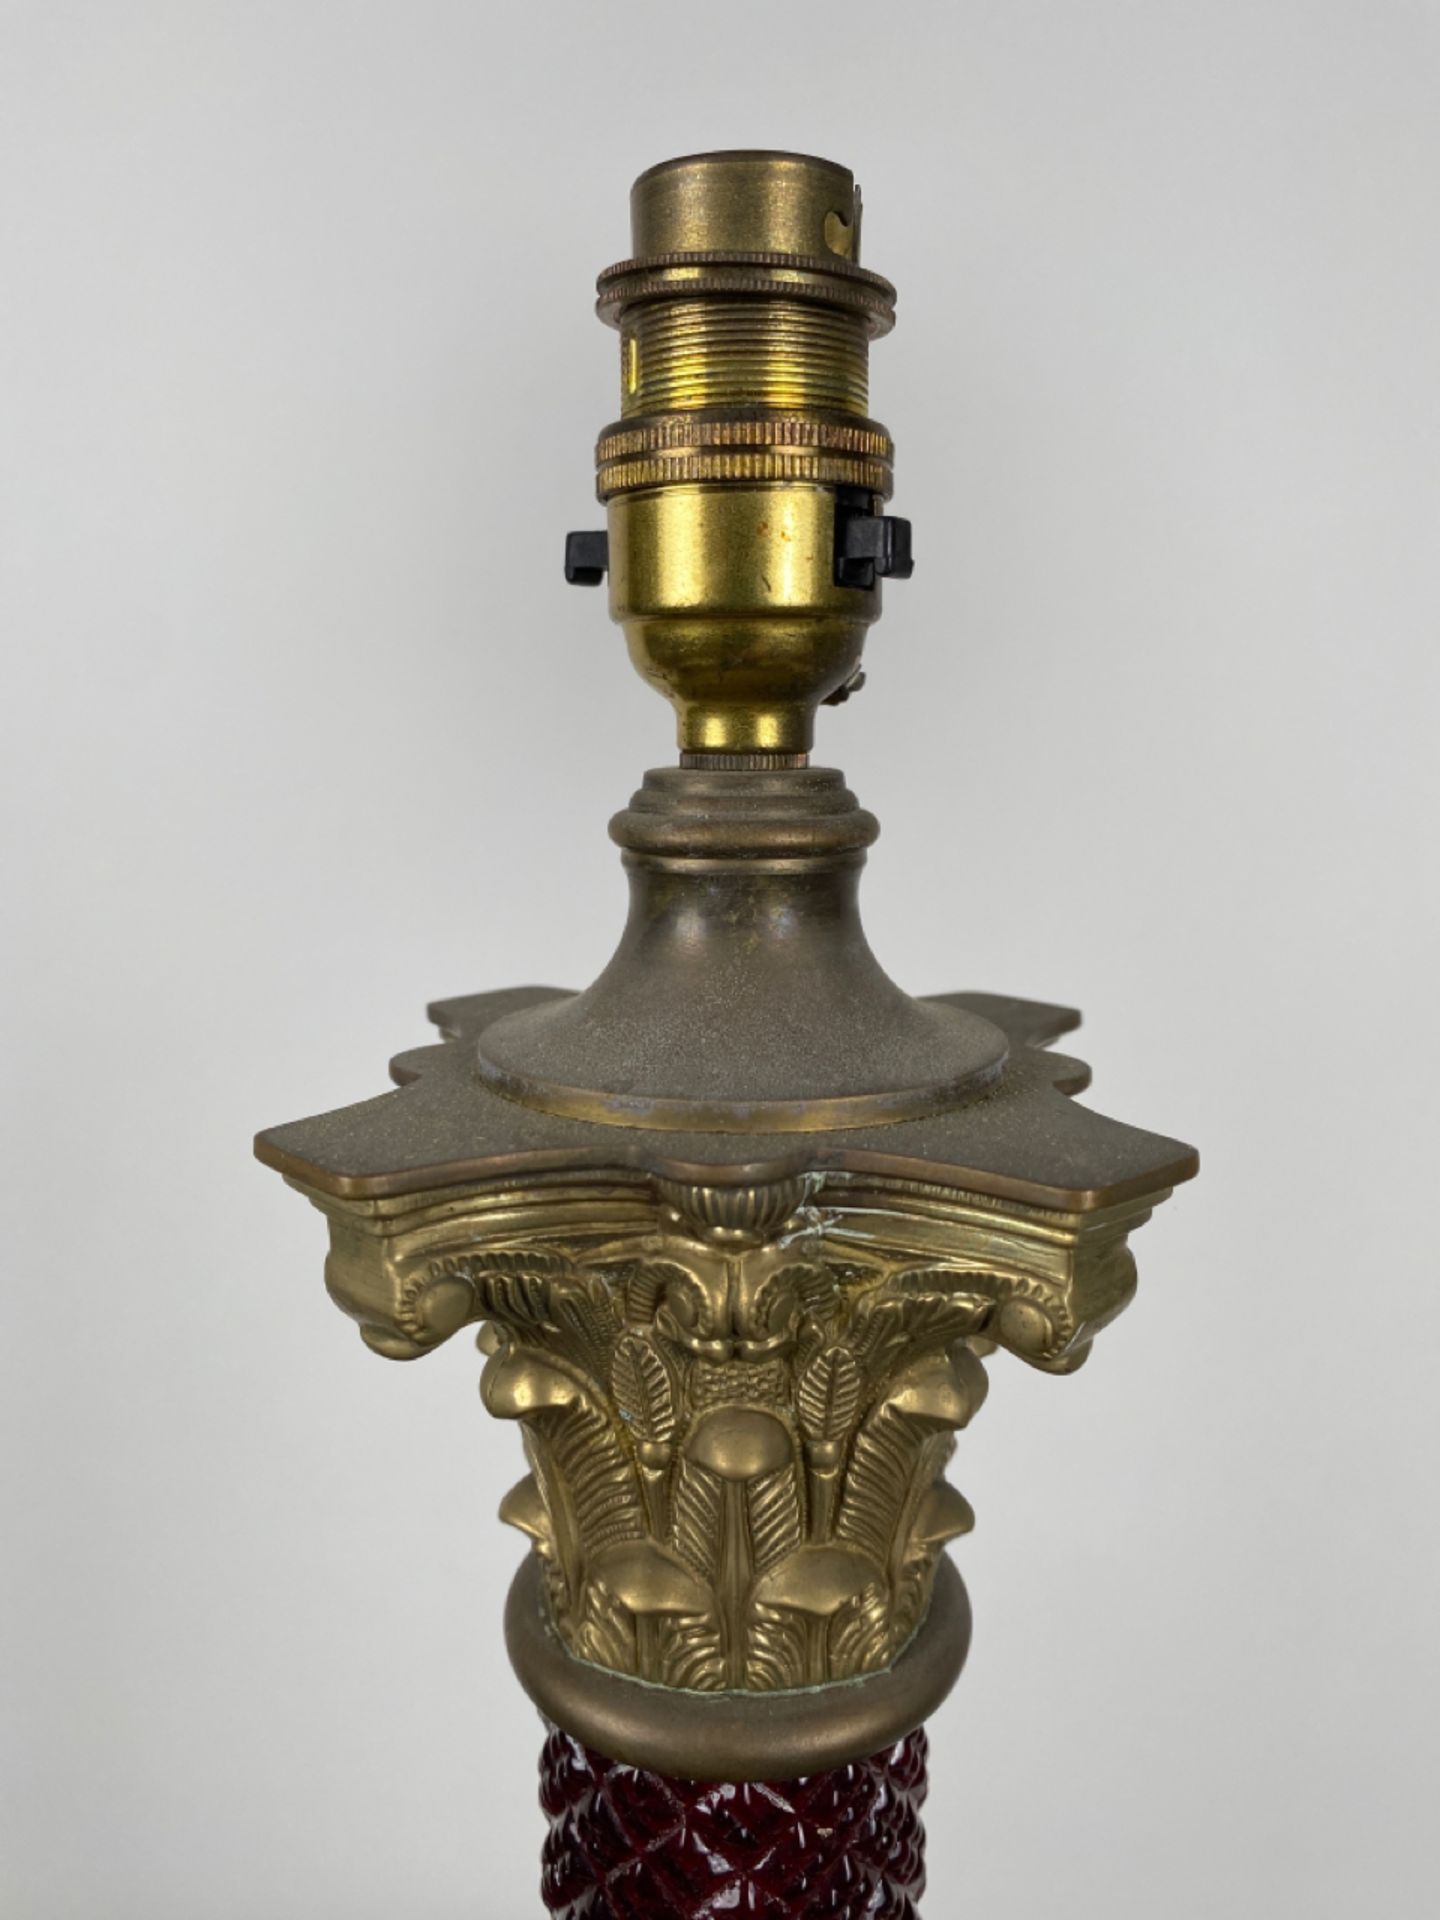 Pair of Decorative Brass Table Lamps - Image 3 of 5